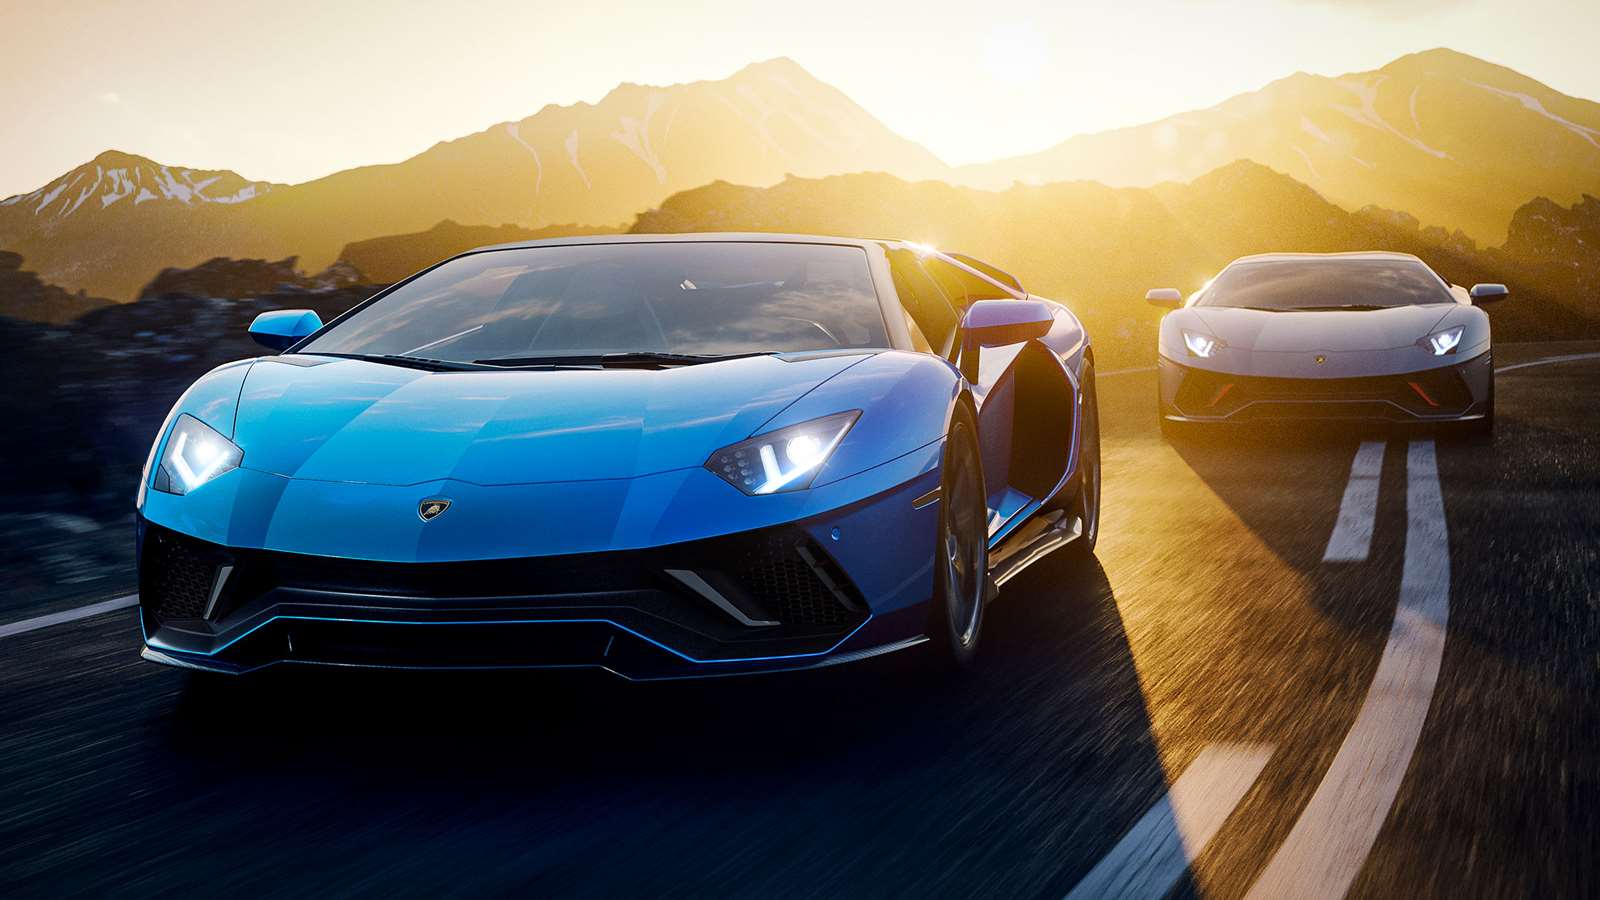 Front view of a blue Lamborghini Aventador Ultimae Roadster in the foreground and grey Aventador Ultimae coupe in the background